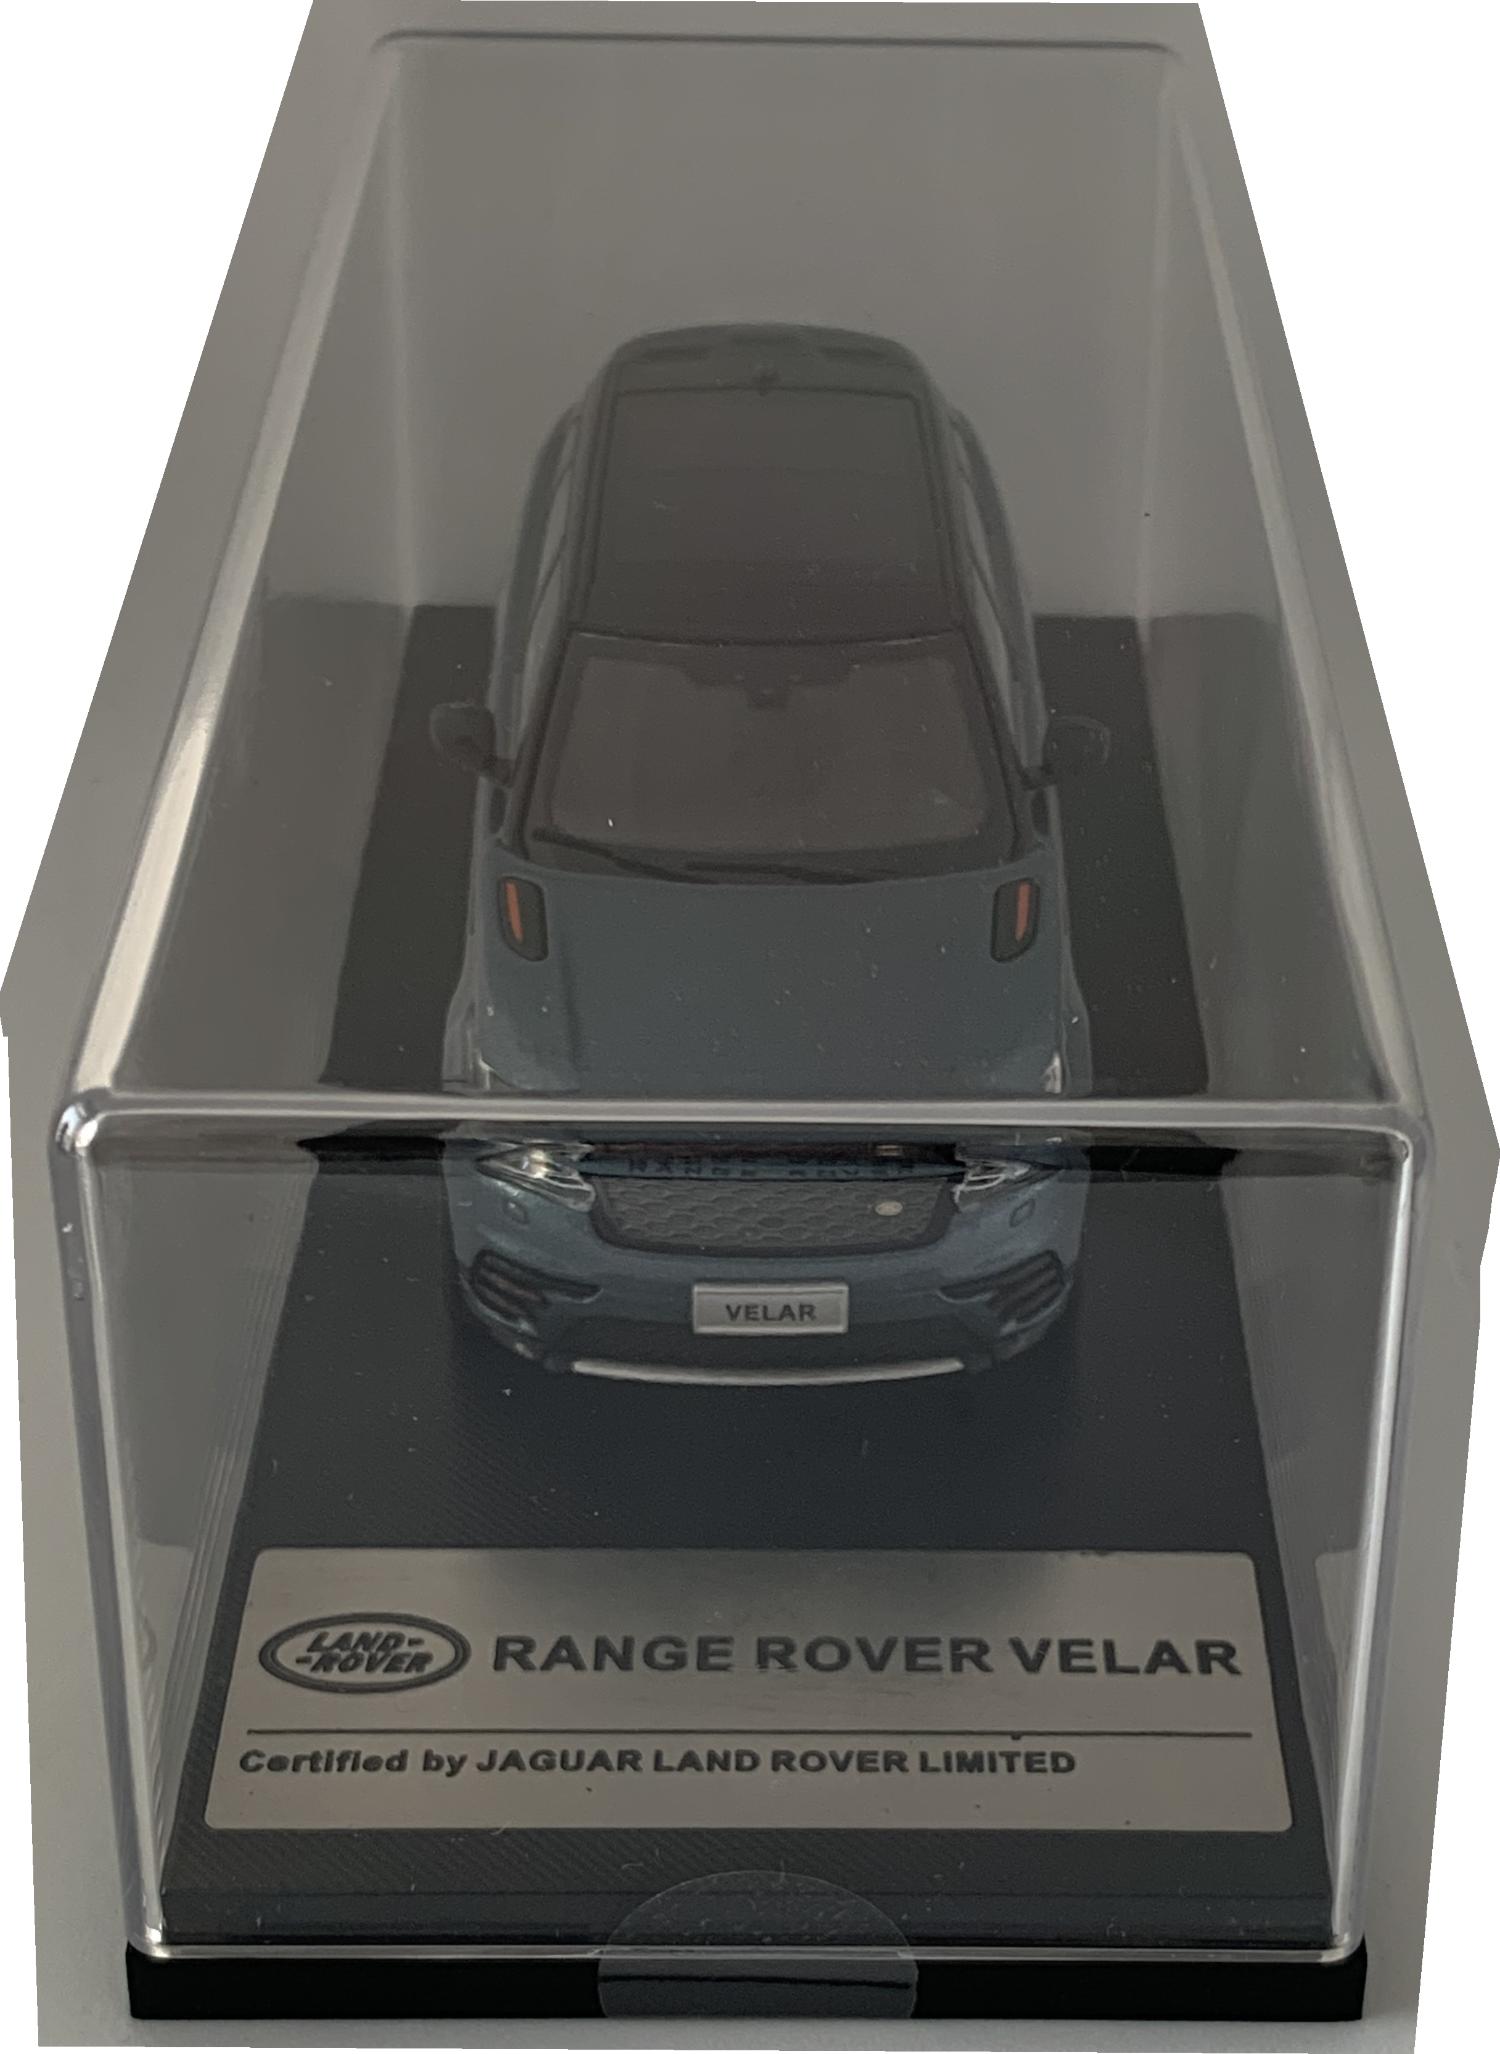 A very high quality accurate representation of the Land Rover Range Rover Evoque First Edition decorated in metallic blue with black panoramic roof, rear top spoiler with dark grey and silver wheels.